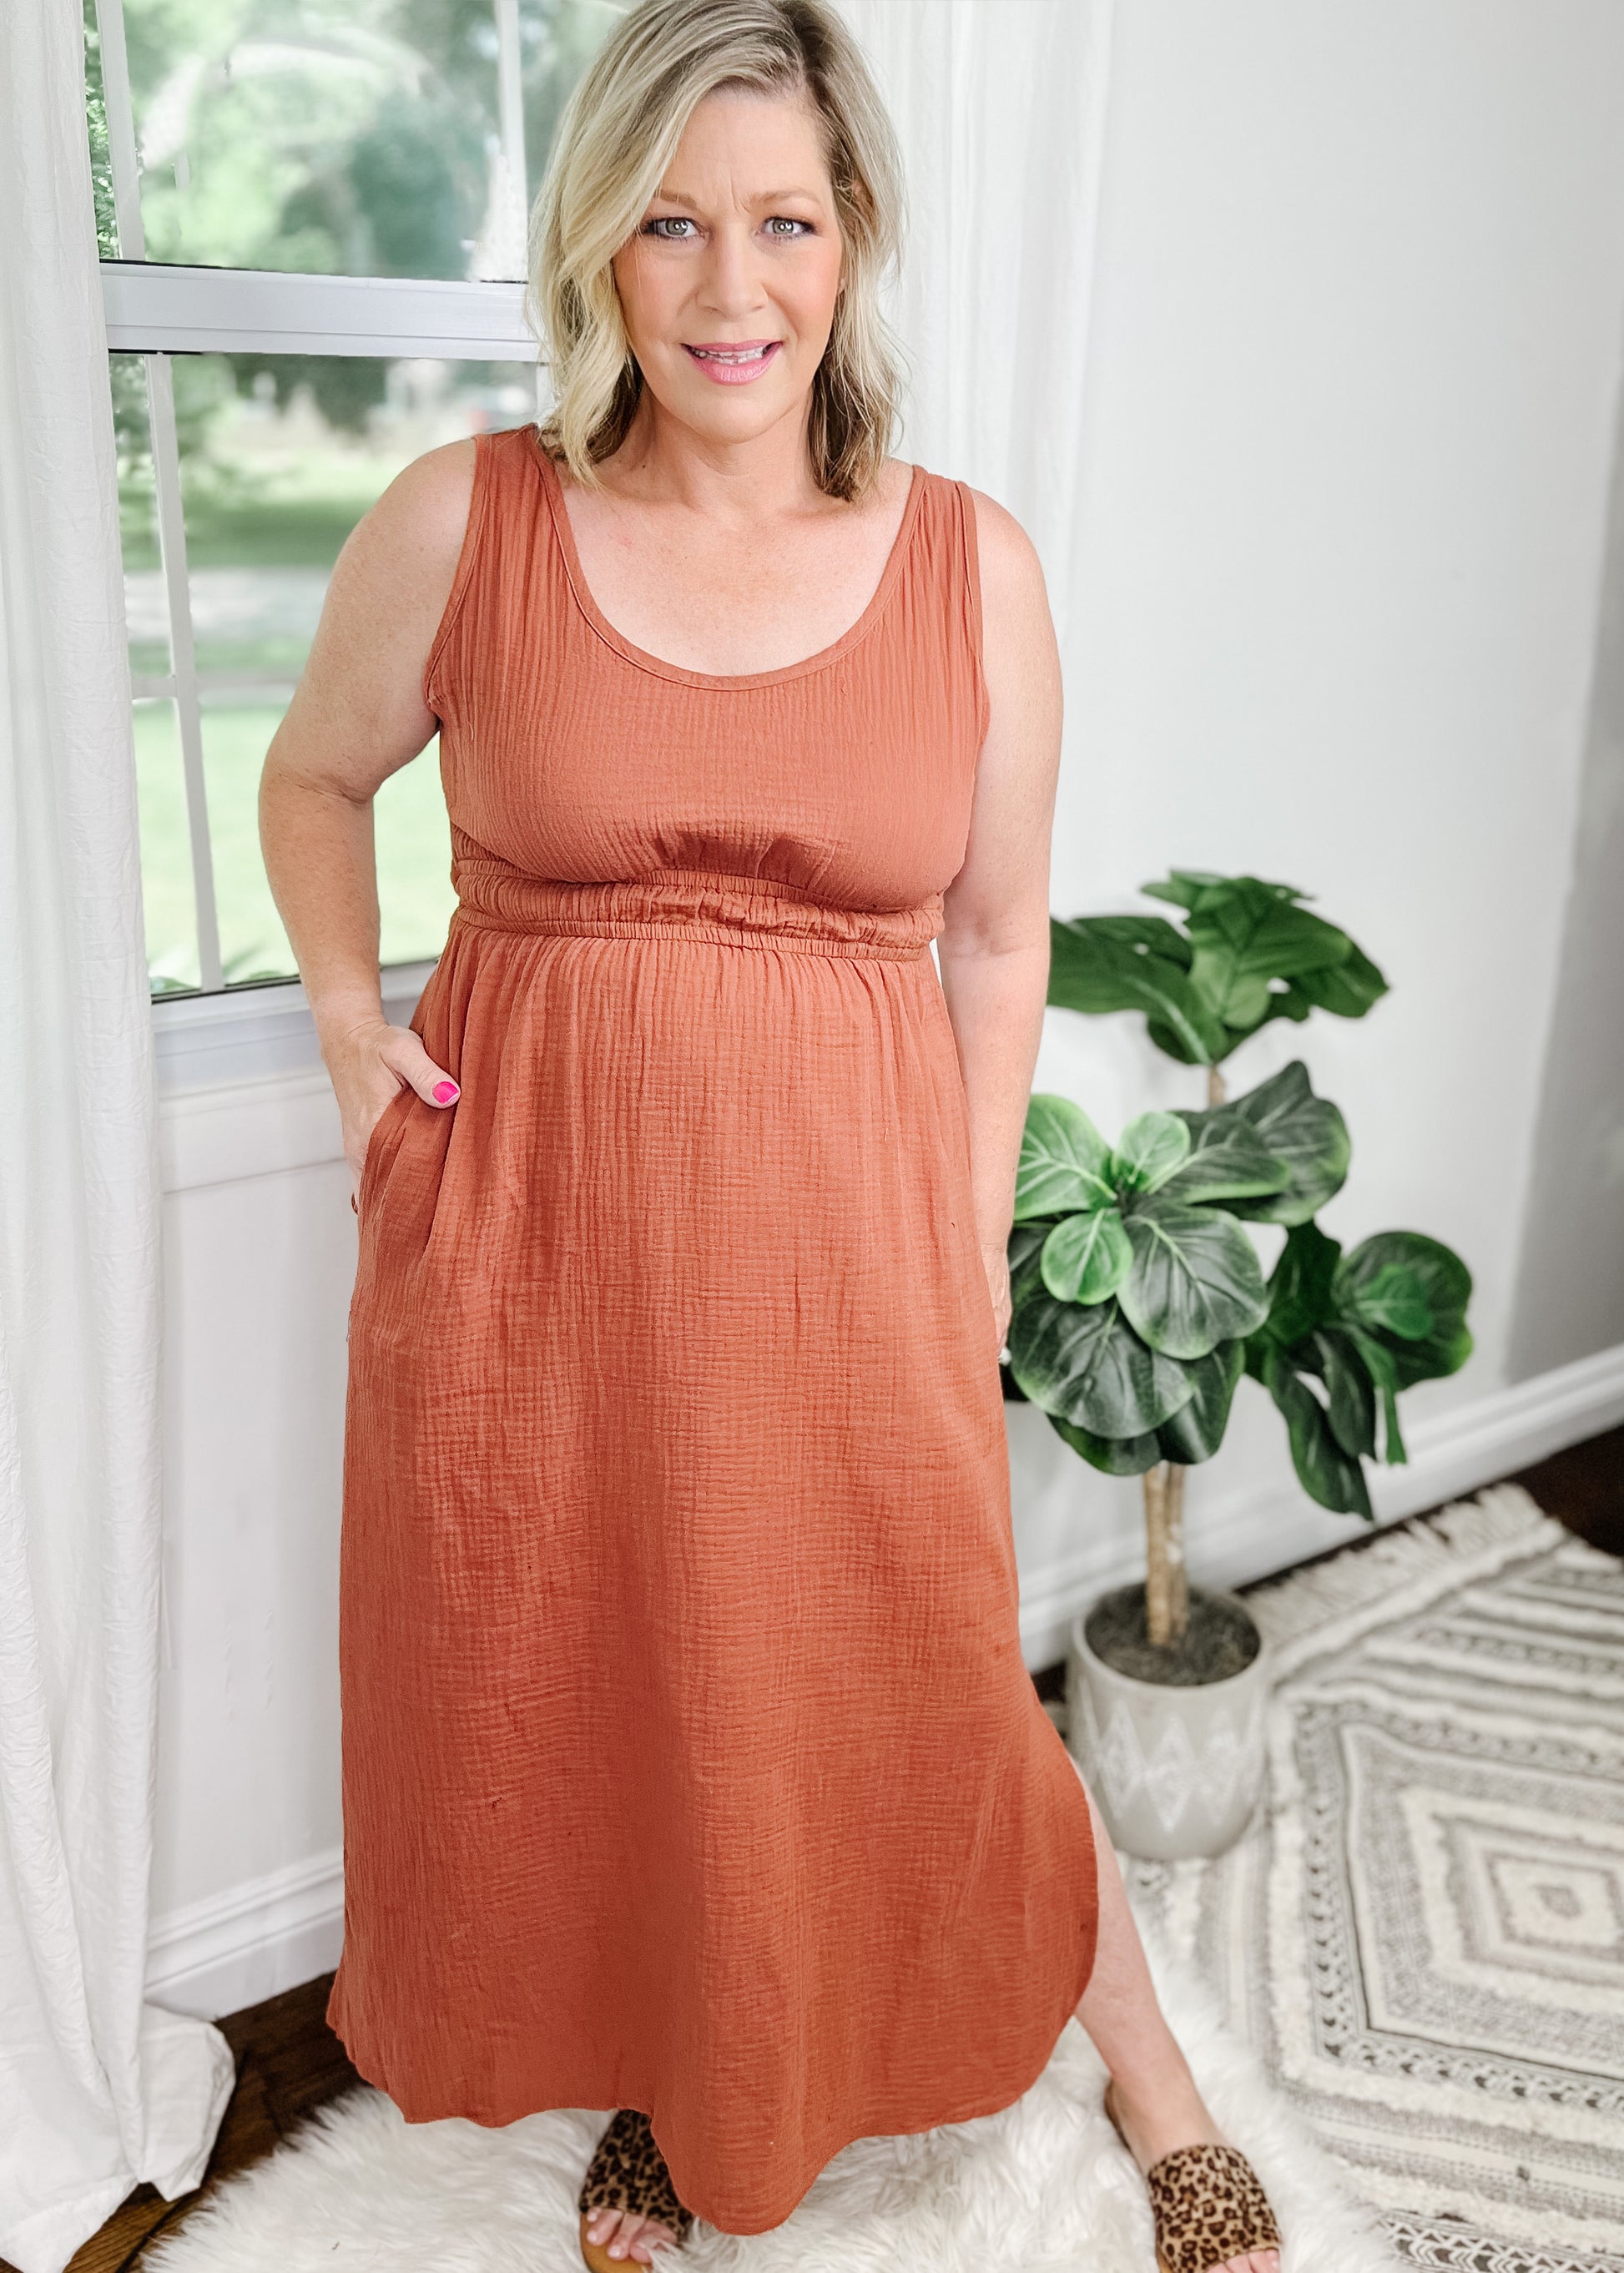 Midi cut out dress in a beautiful terracotta and light gauze fabric. Tank top style sleeves with 2 rows of elastic about an Ince apart for some pretty details. Side slits on bottom curved hemline. Cut out detail is in back above waistline. 